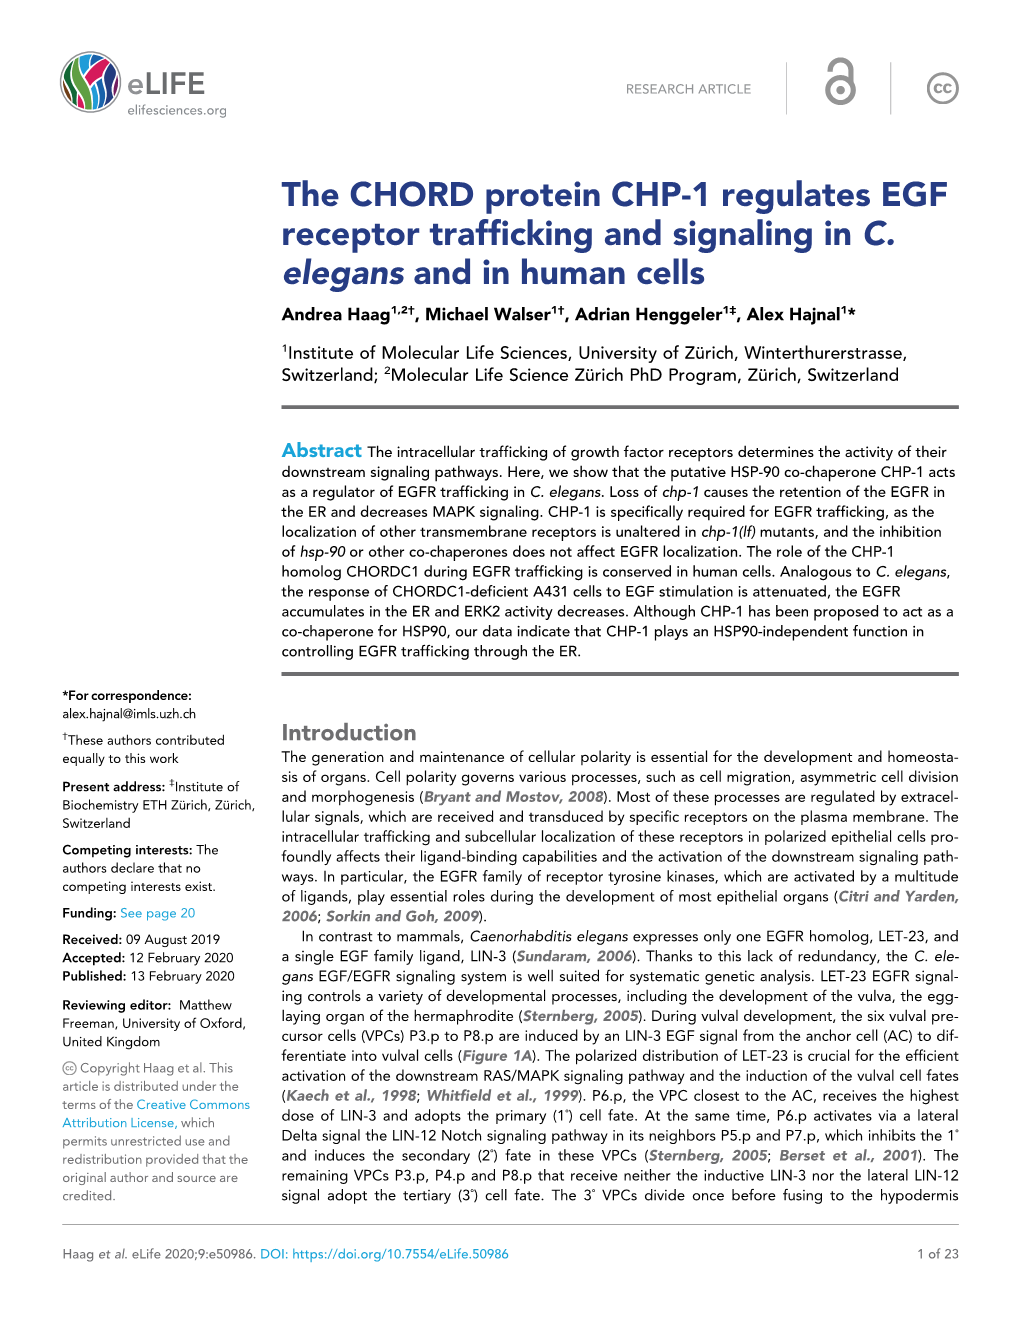 The CHORD Protein CHP-1 Regulates EGF Receptor Trafficking and Signaling in C